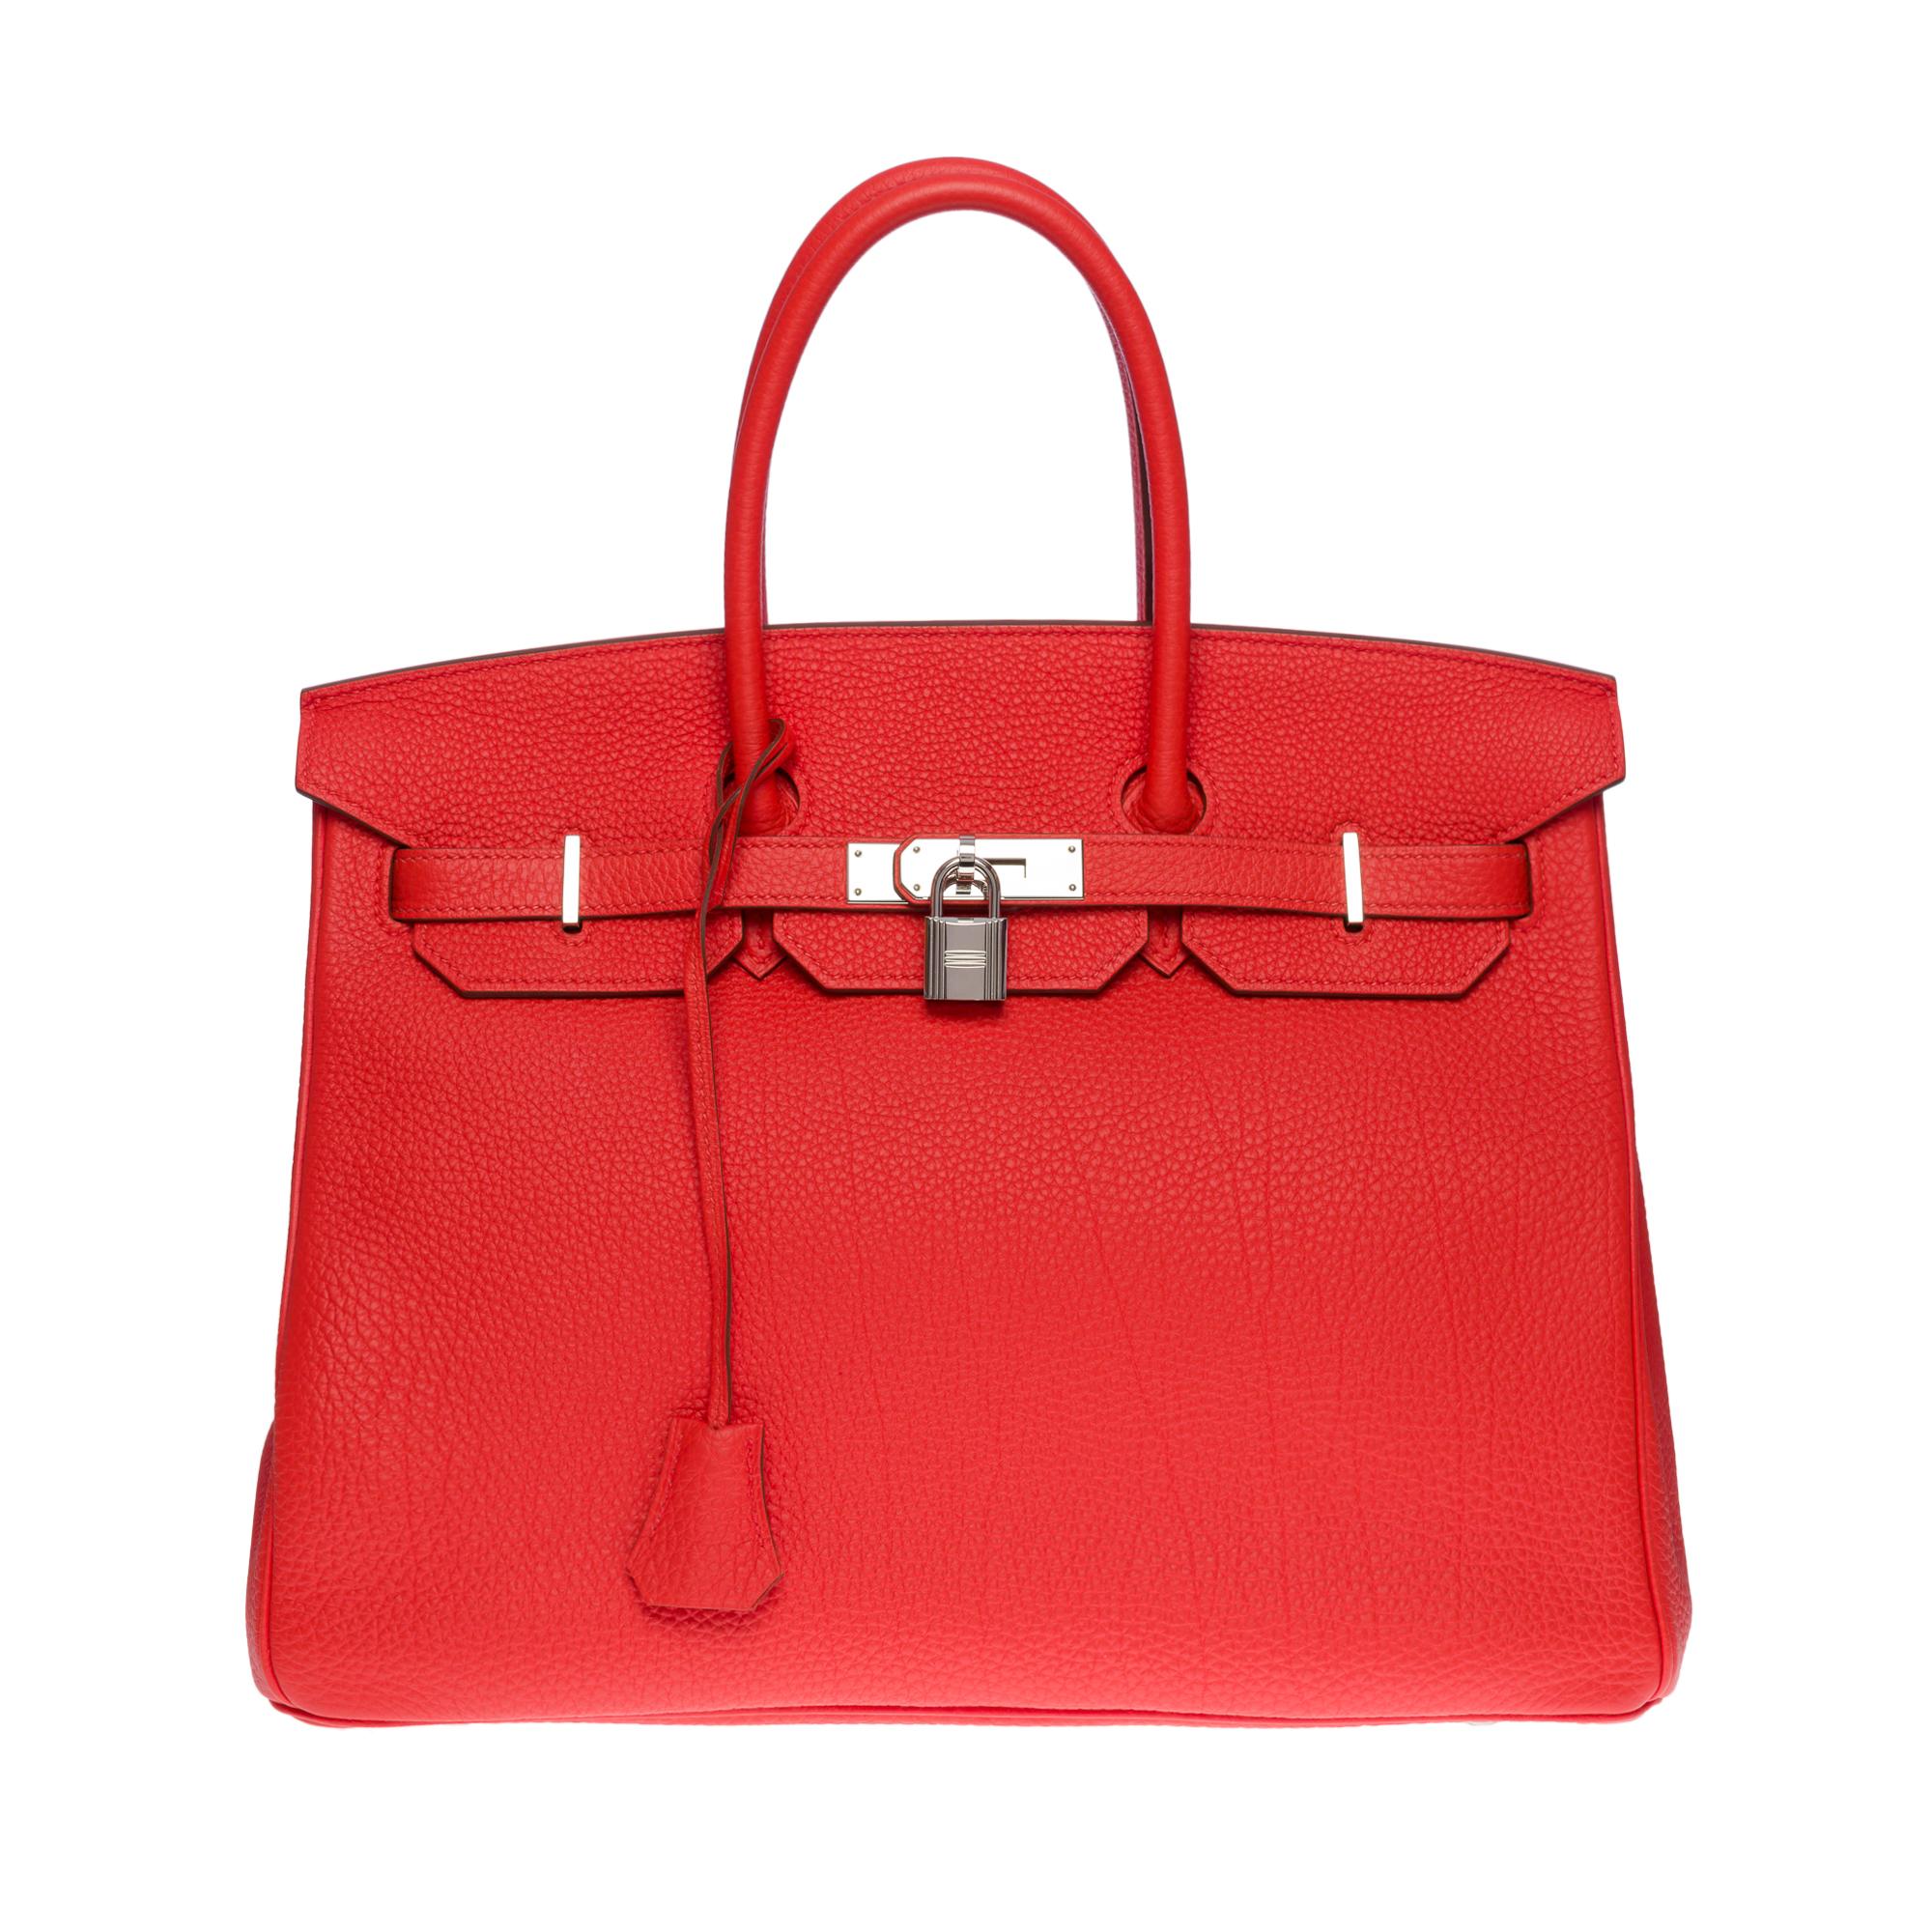 Beautiful and bright Hermes Birkin 35 handbag in Togo Orange Poppy leather, palladium silver metal hardware, double handle in orange leather allowing a hand carry

Flap closure
Orange leather lining, one zippered pocket, one patch pocket
Signature: